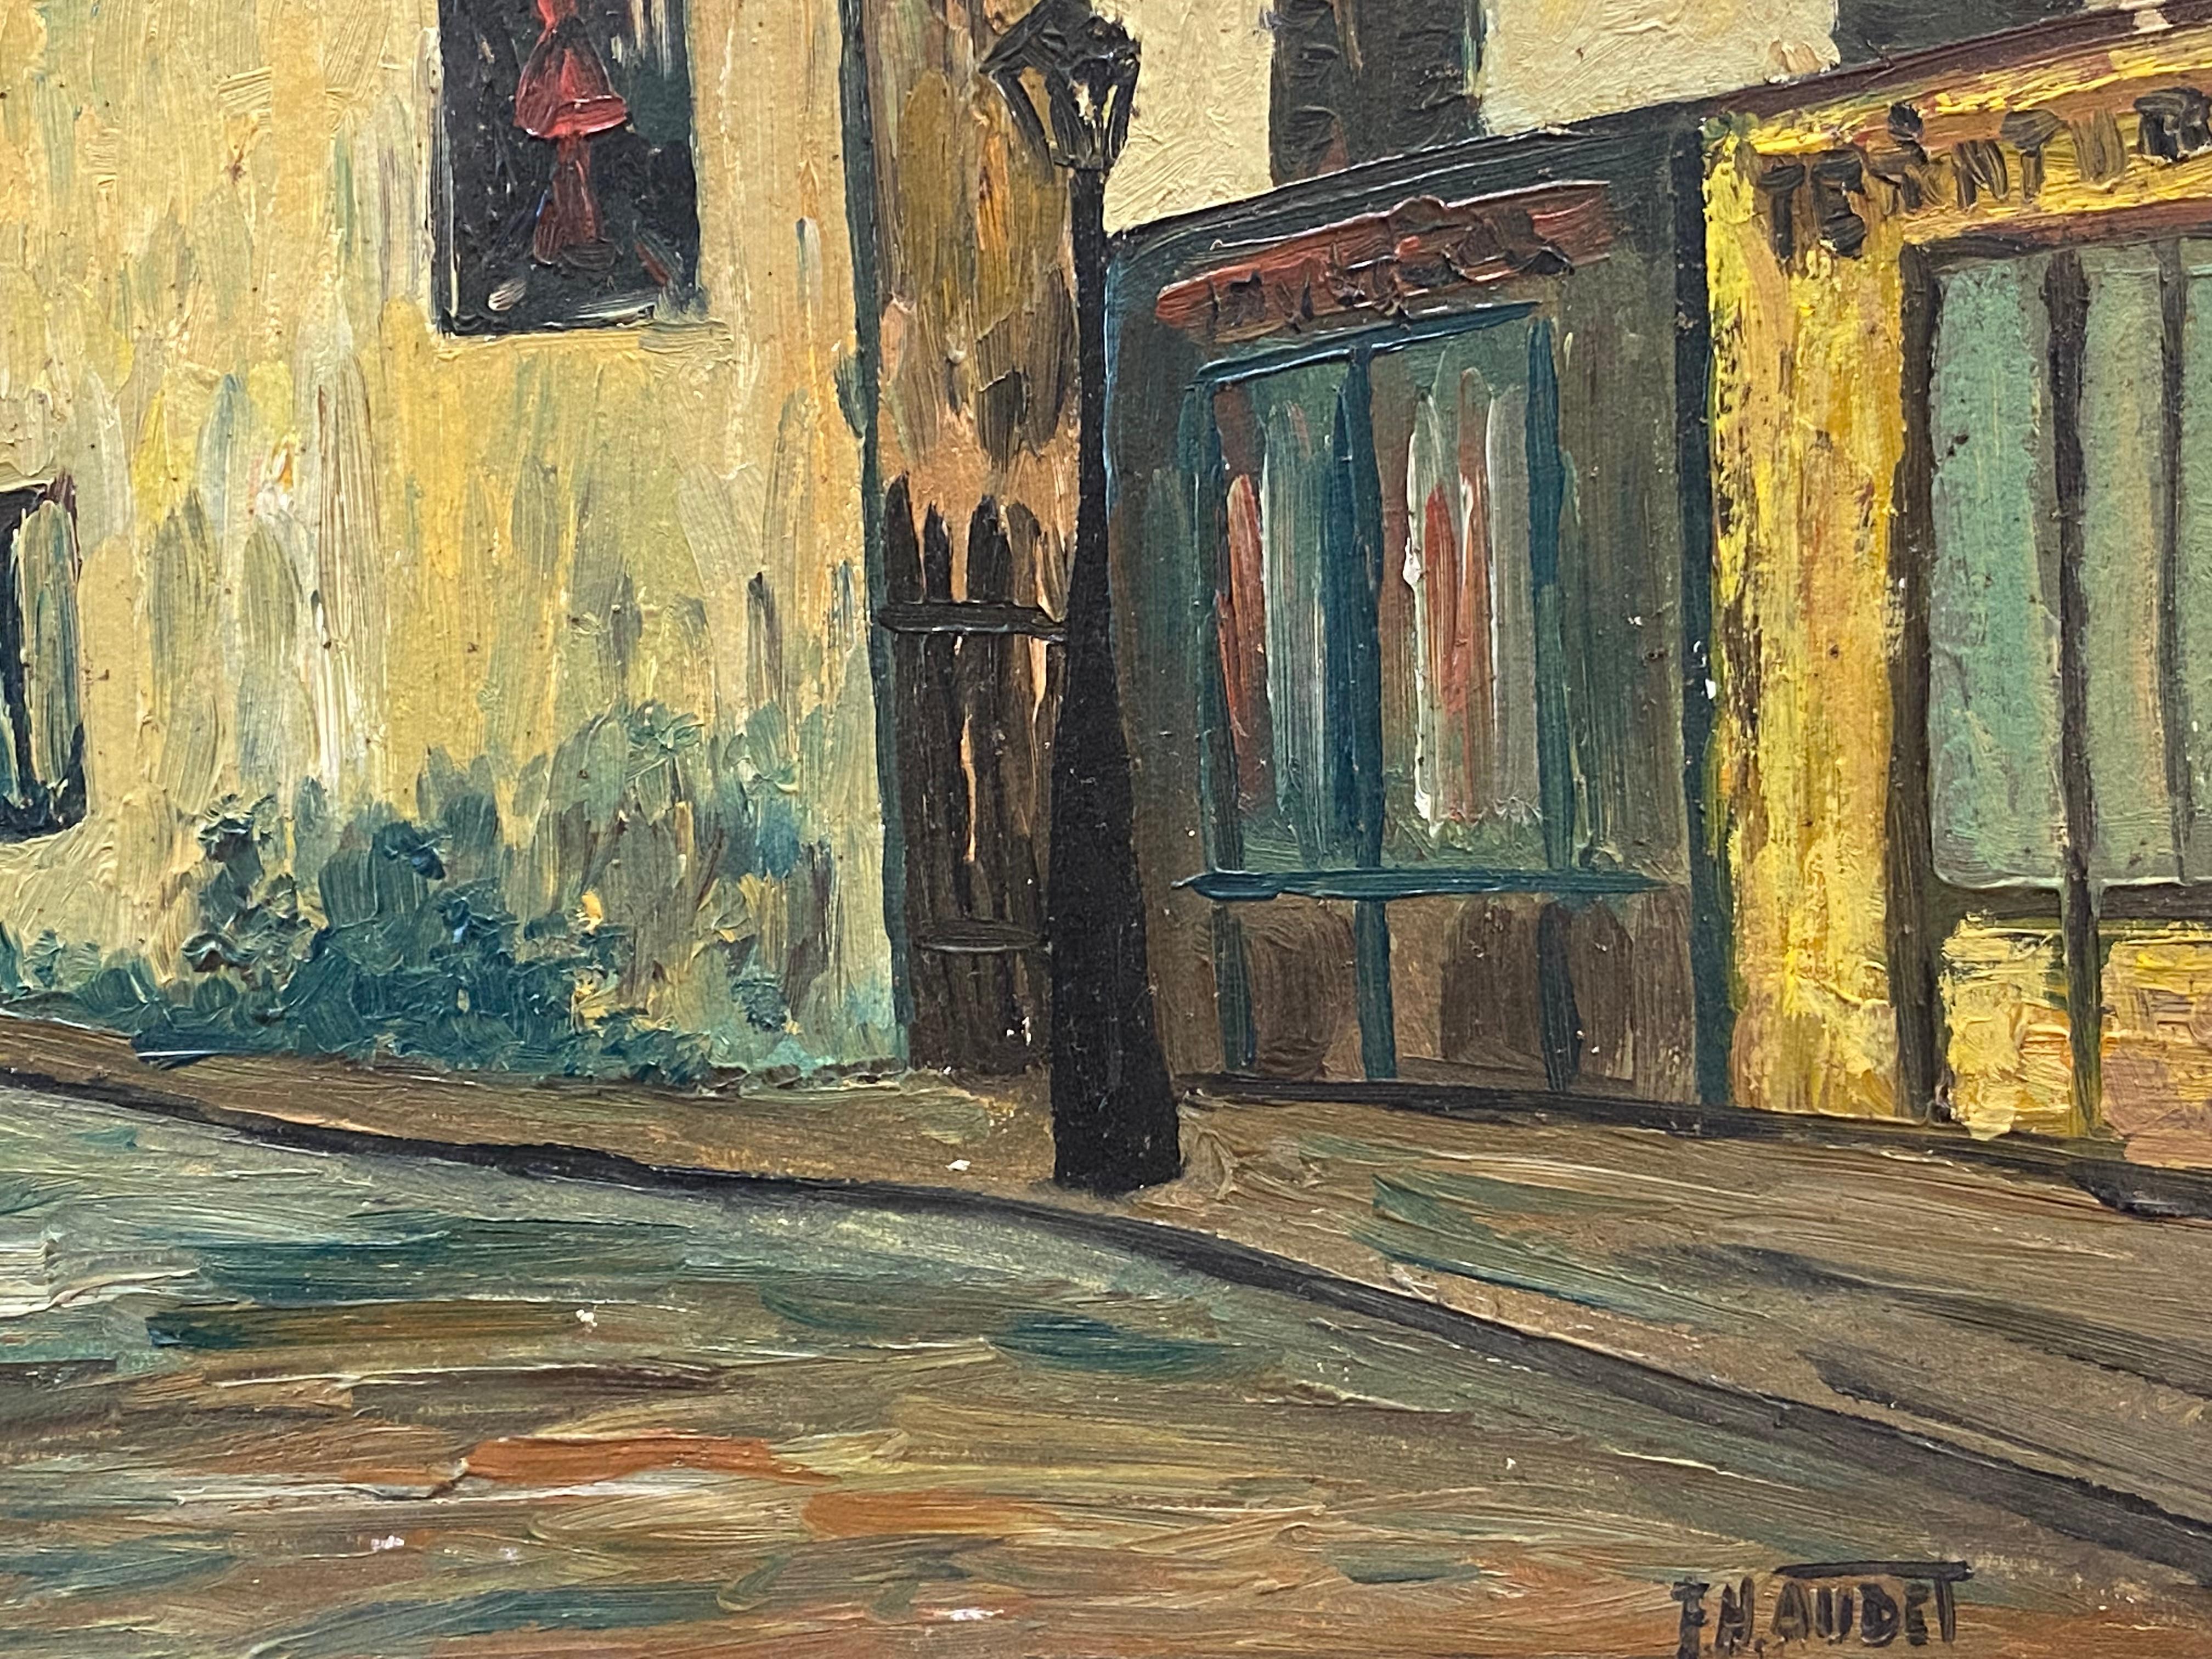 Street Scene
by Fernand Audet (French, Tarascon 1923- Mulhouse 2016)
oil painting on board , signed and unframed

painting: 13 x 16 inches

A fine 20th century oil painting by the listed French Impressionist artist, Fernand Audet (1923-2016).